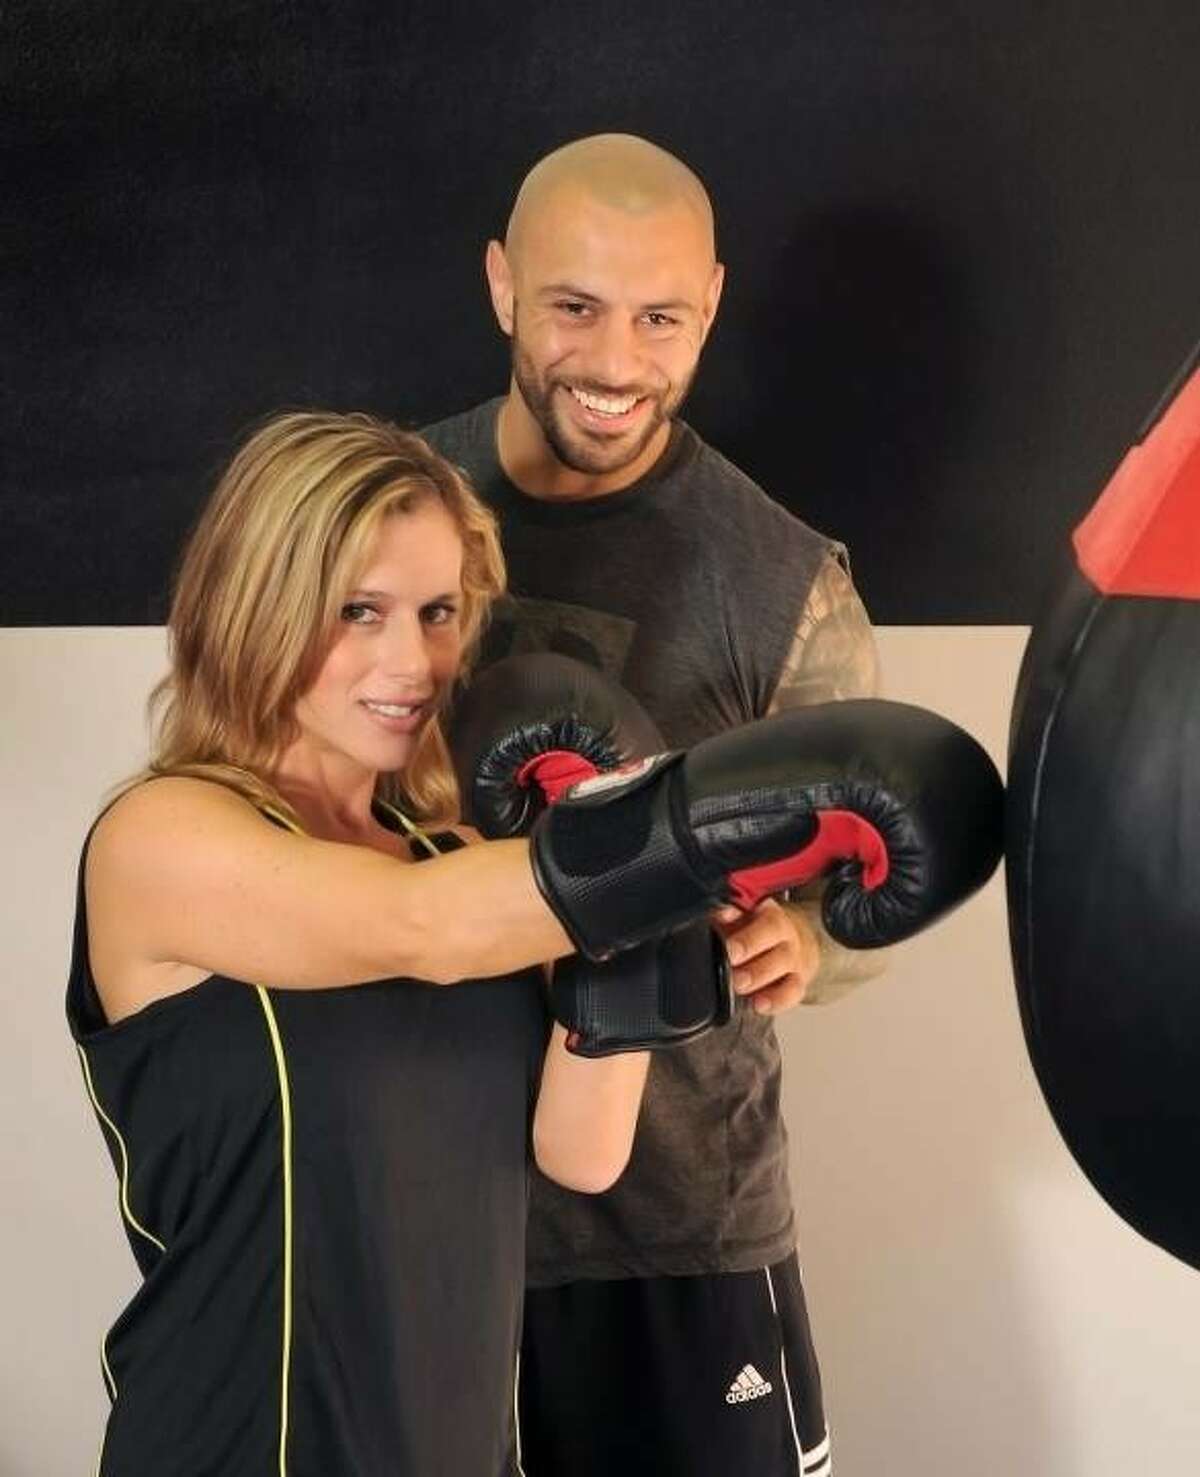 Dana “Balboa” Pritchard works out with Antonio Flores in preparation for her bout during the Fight for a Cause Sept. 8 to benefit 14 Montgomery County charities.